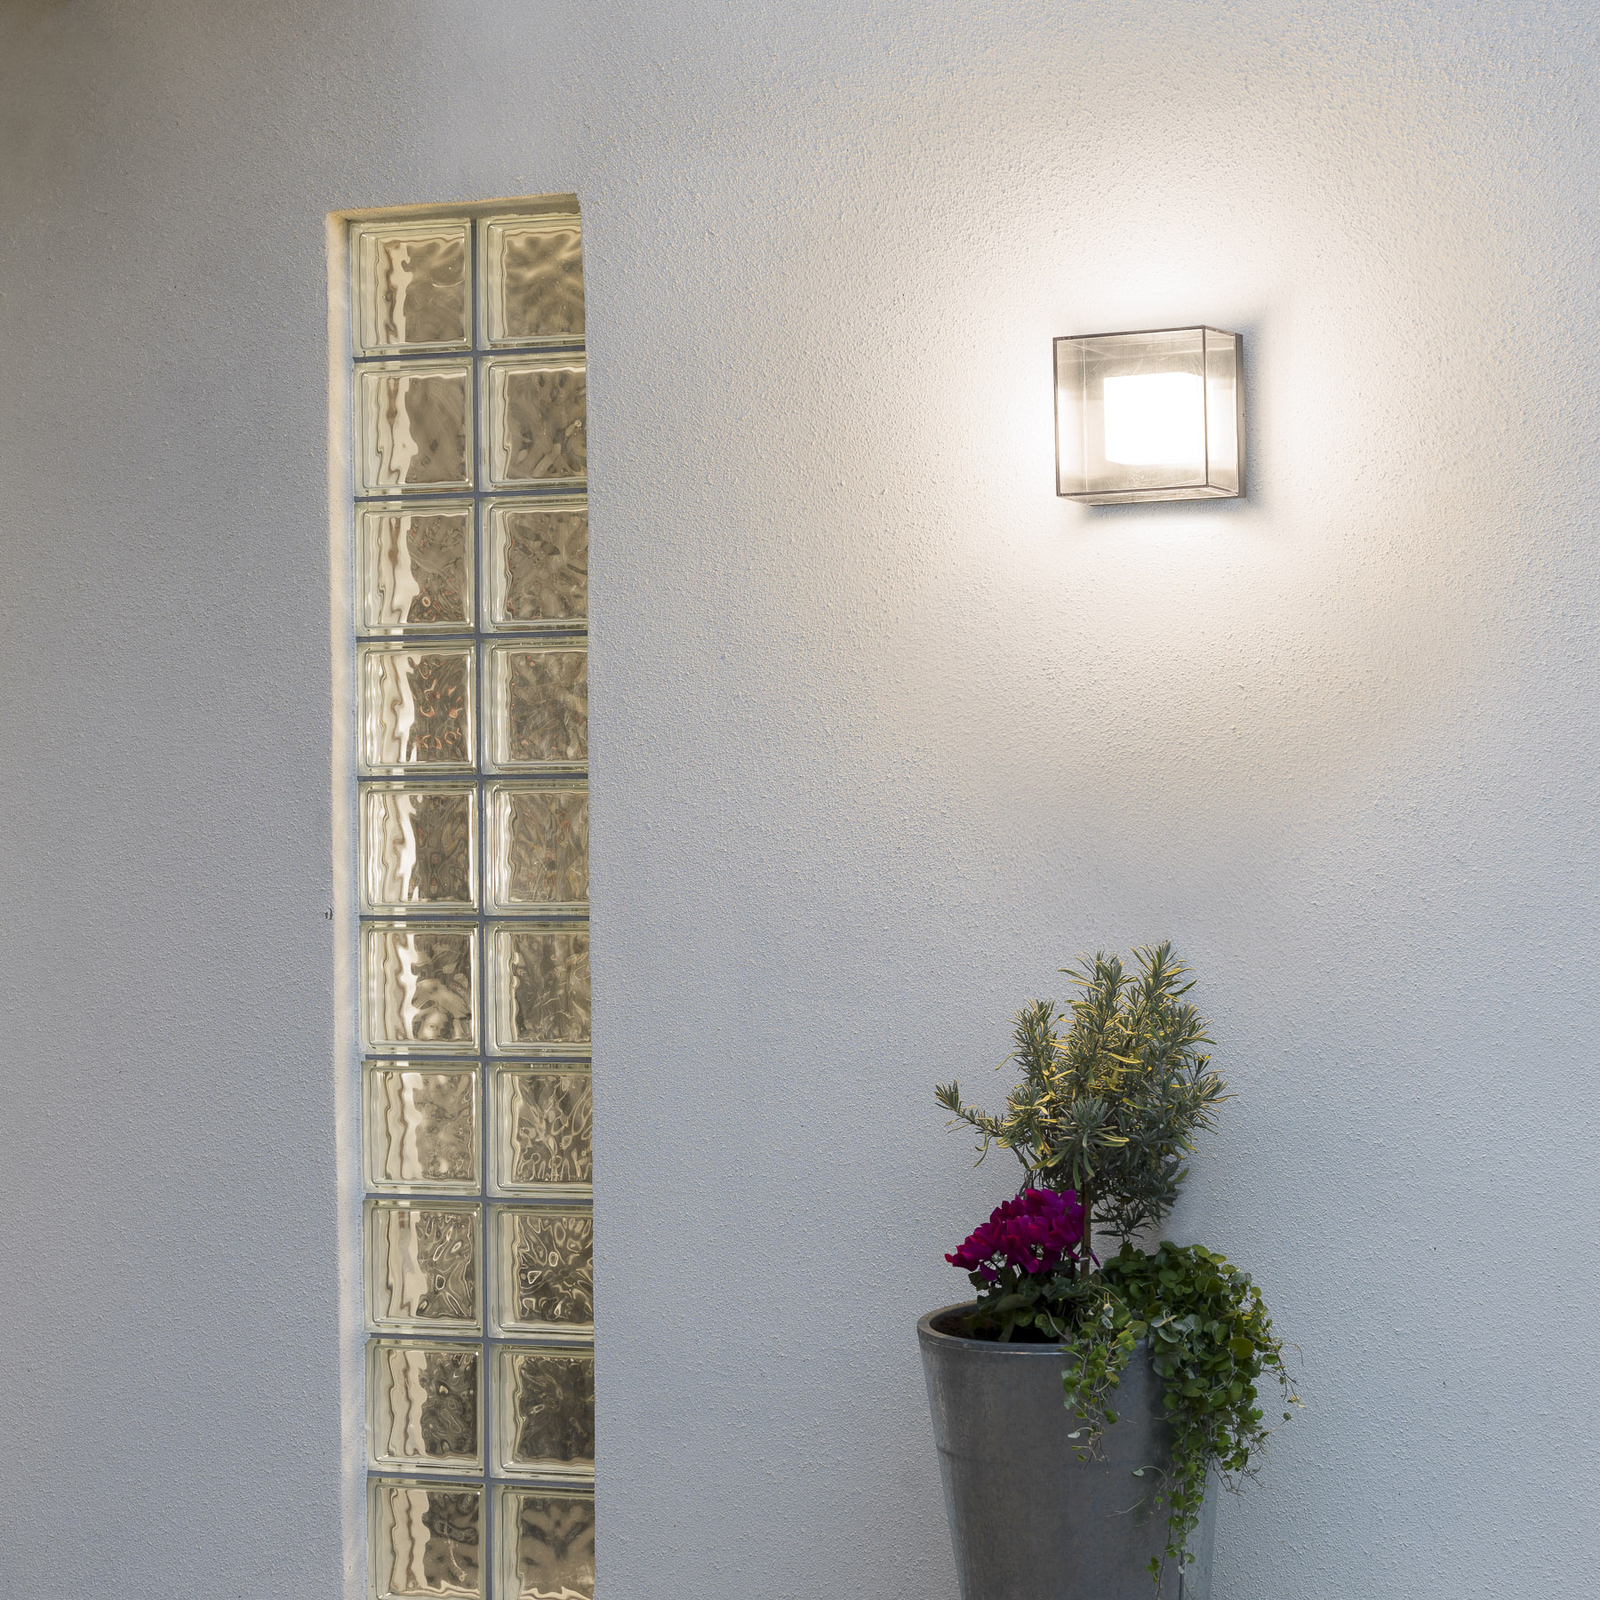 Square Sanremo LED outdoor wall light